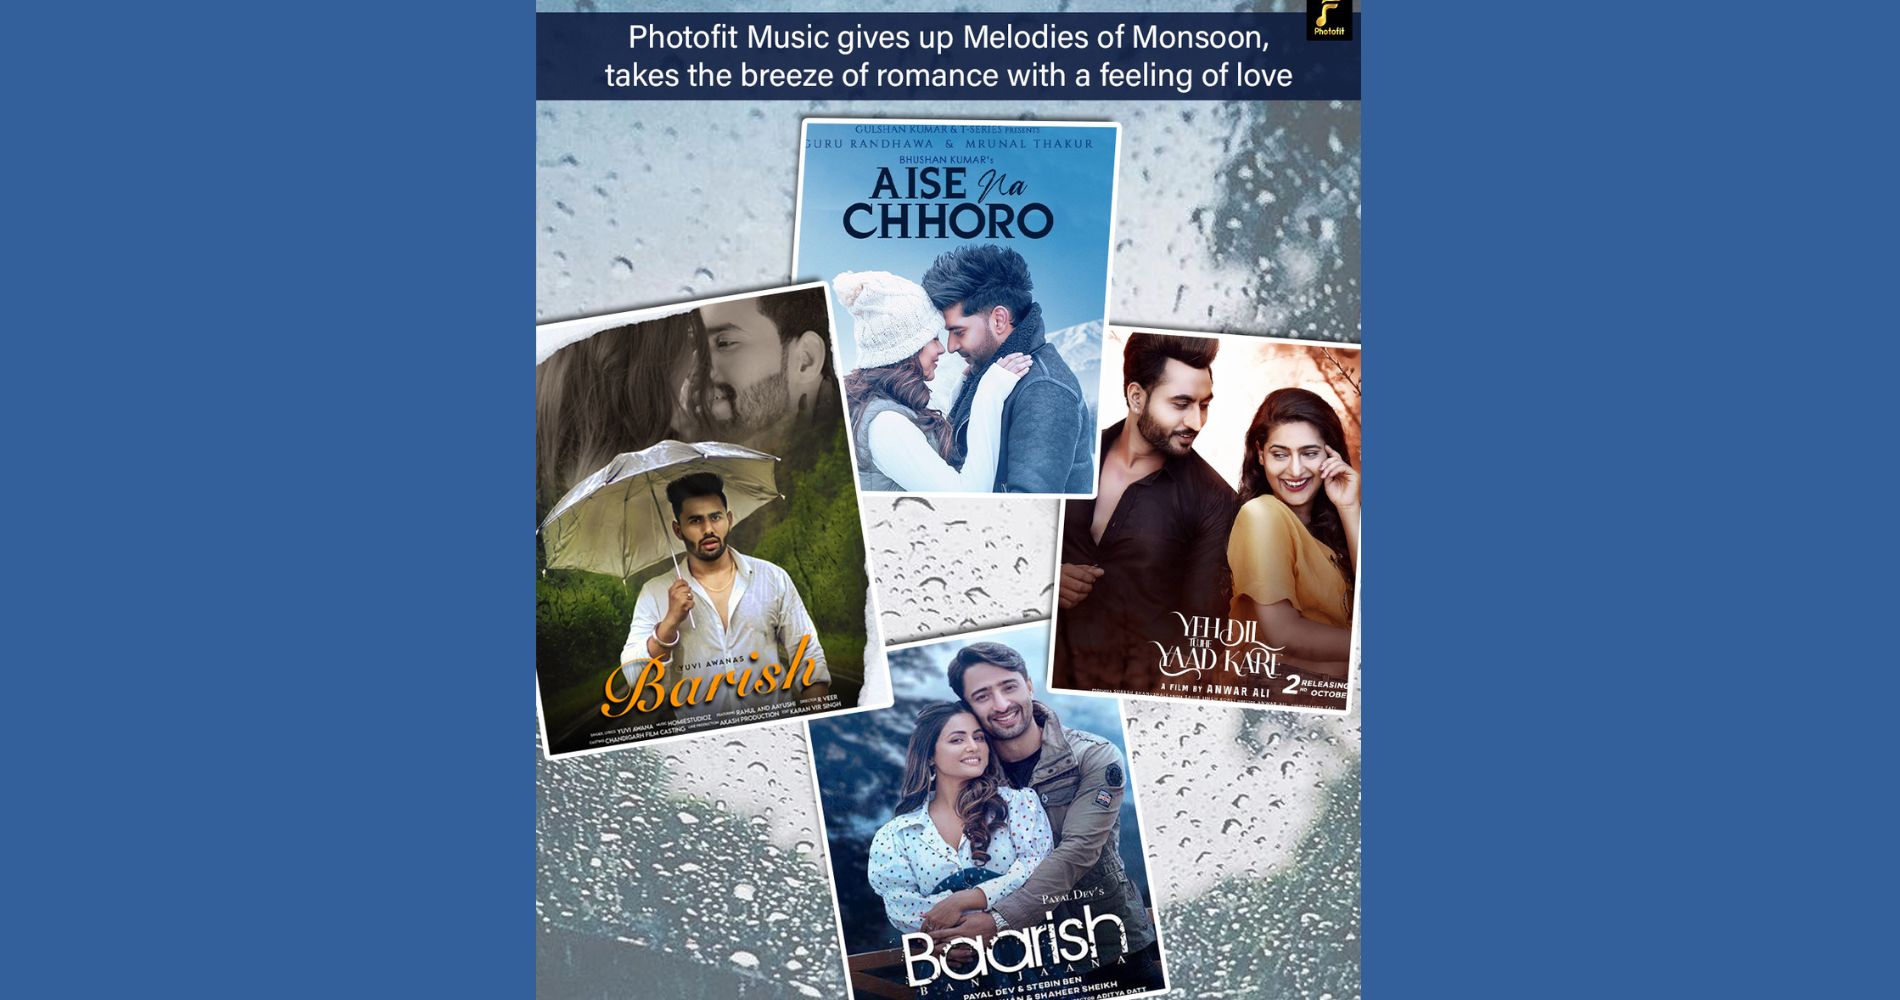 Photofit Music gives up Melodies of Monsoon, takes the breeze